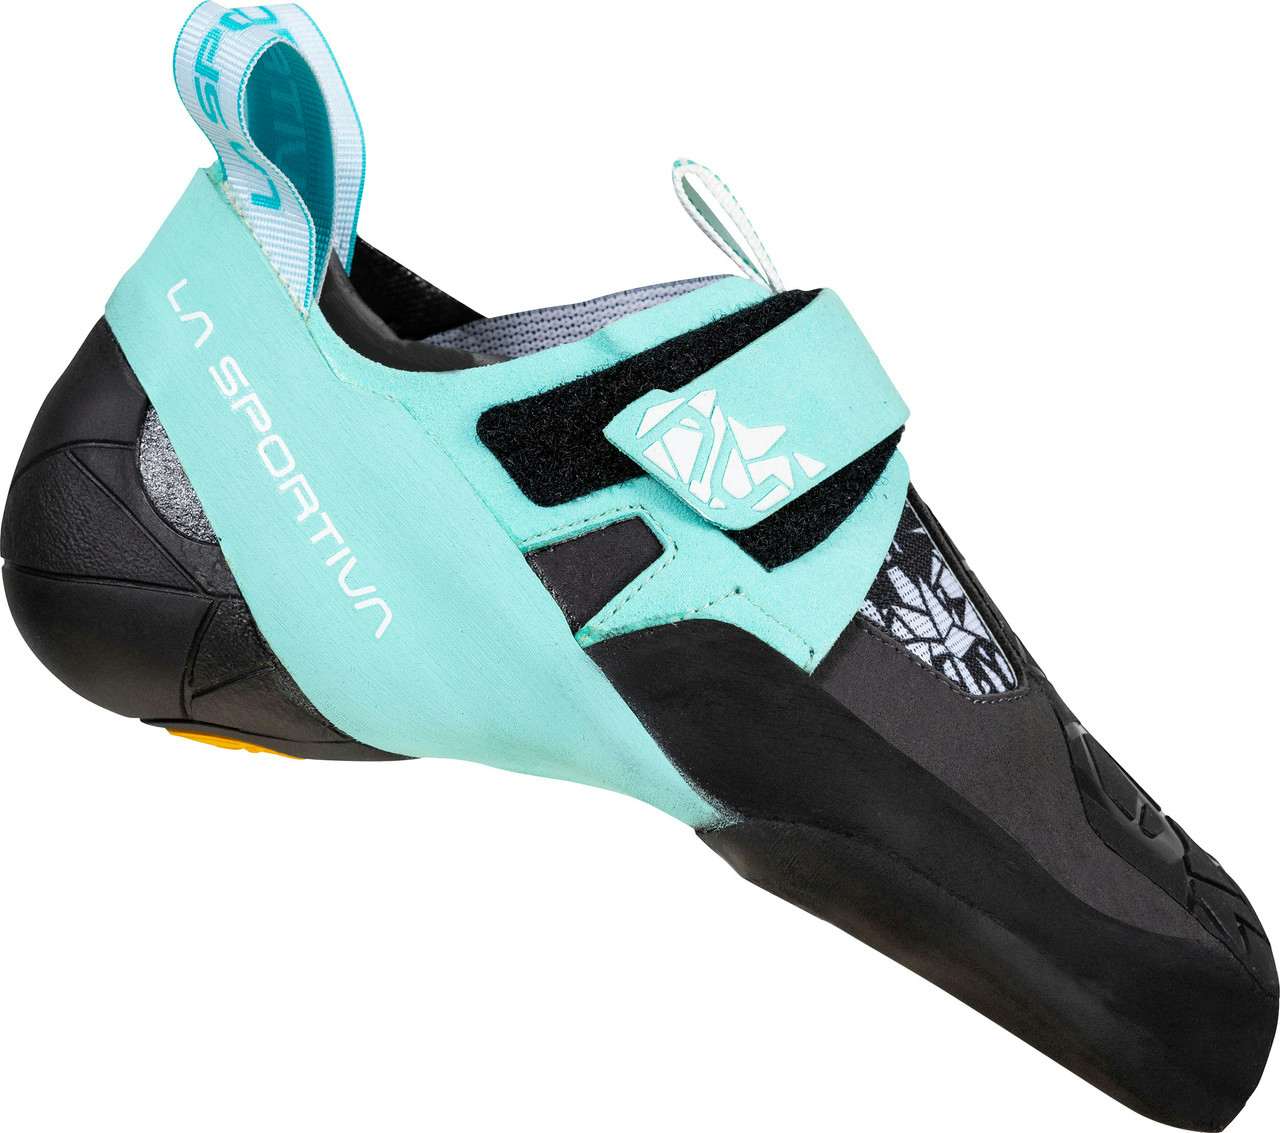 Chaussons Skwama Vegan Carbone/Turquoise